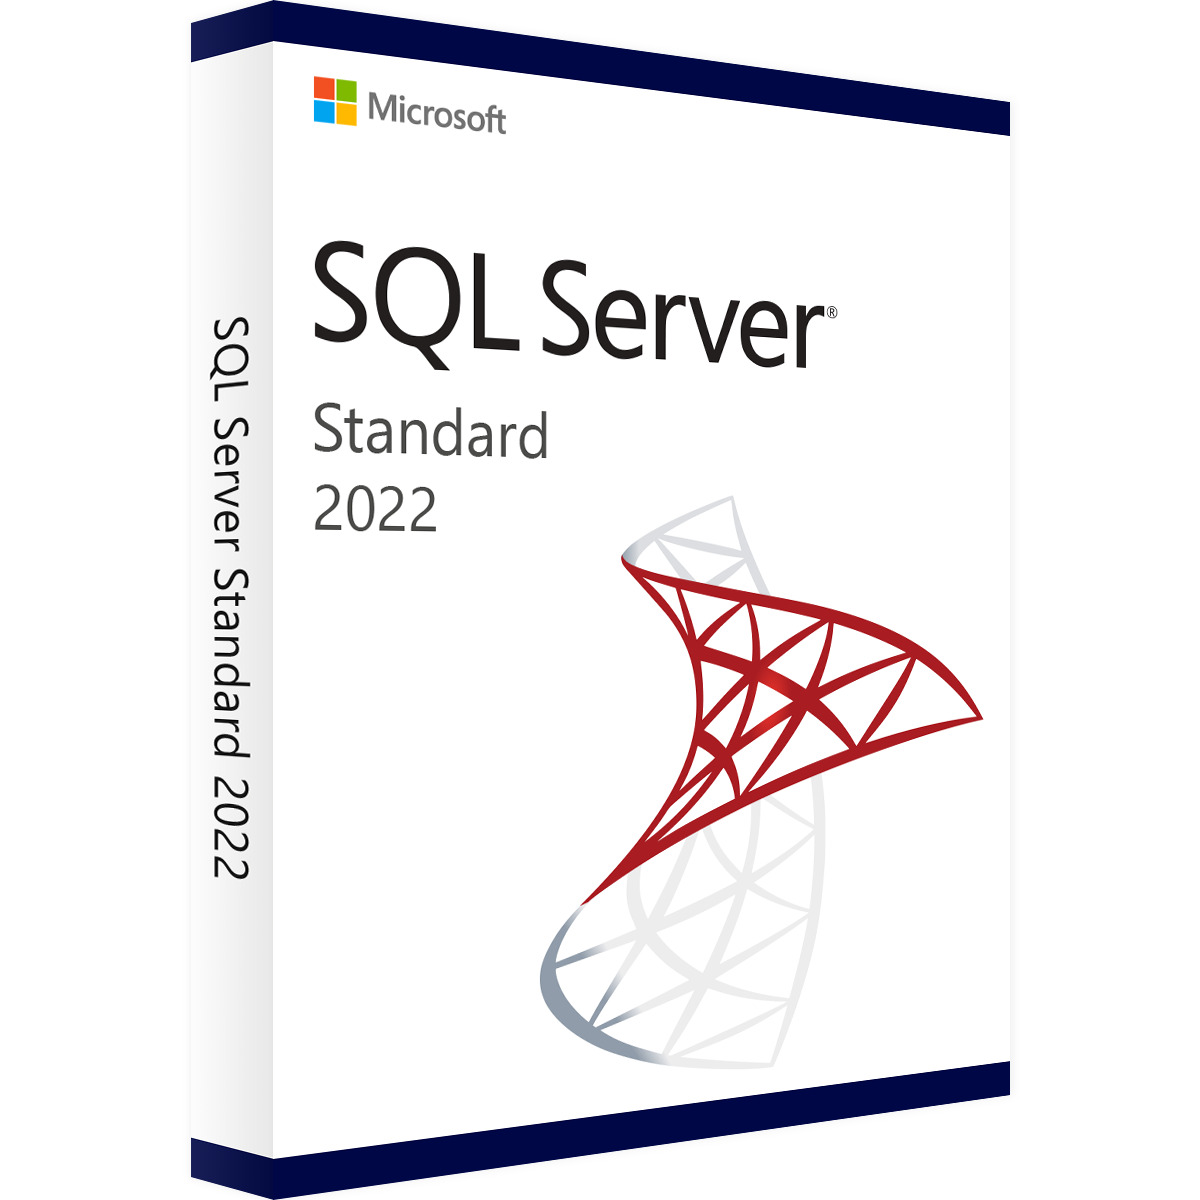 New Microsoft SQL Server 2022 Standard with 24 Core License, unlimited User CALs